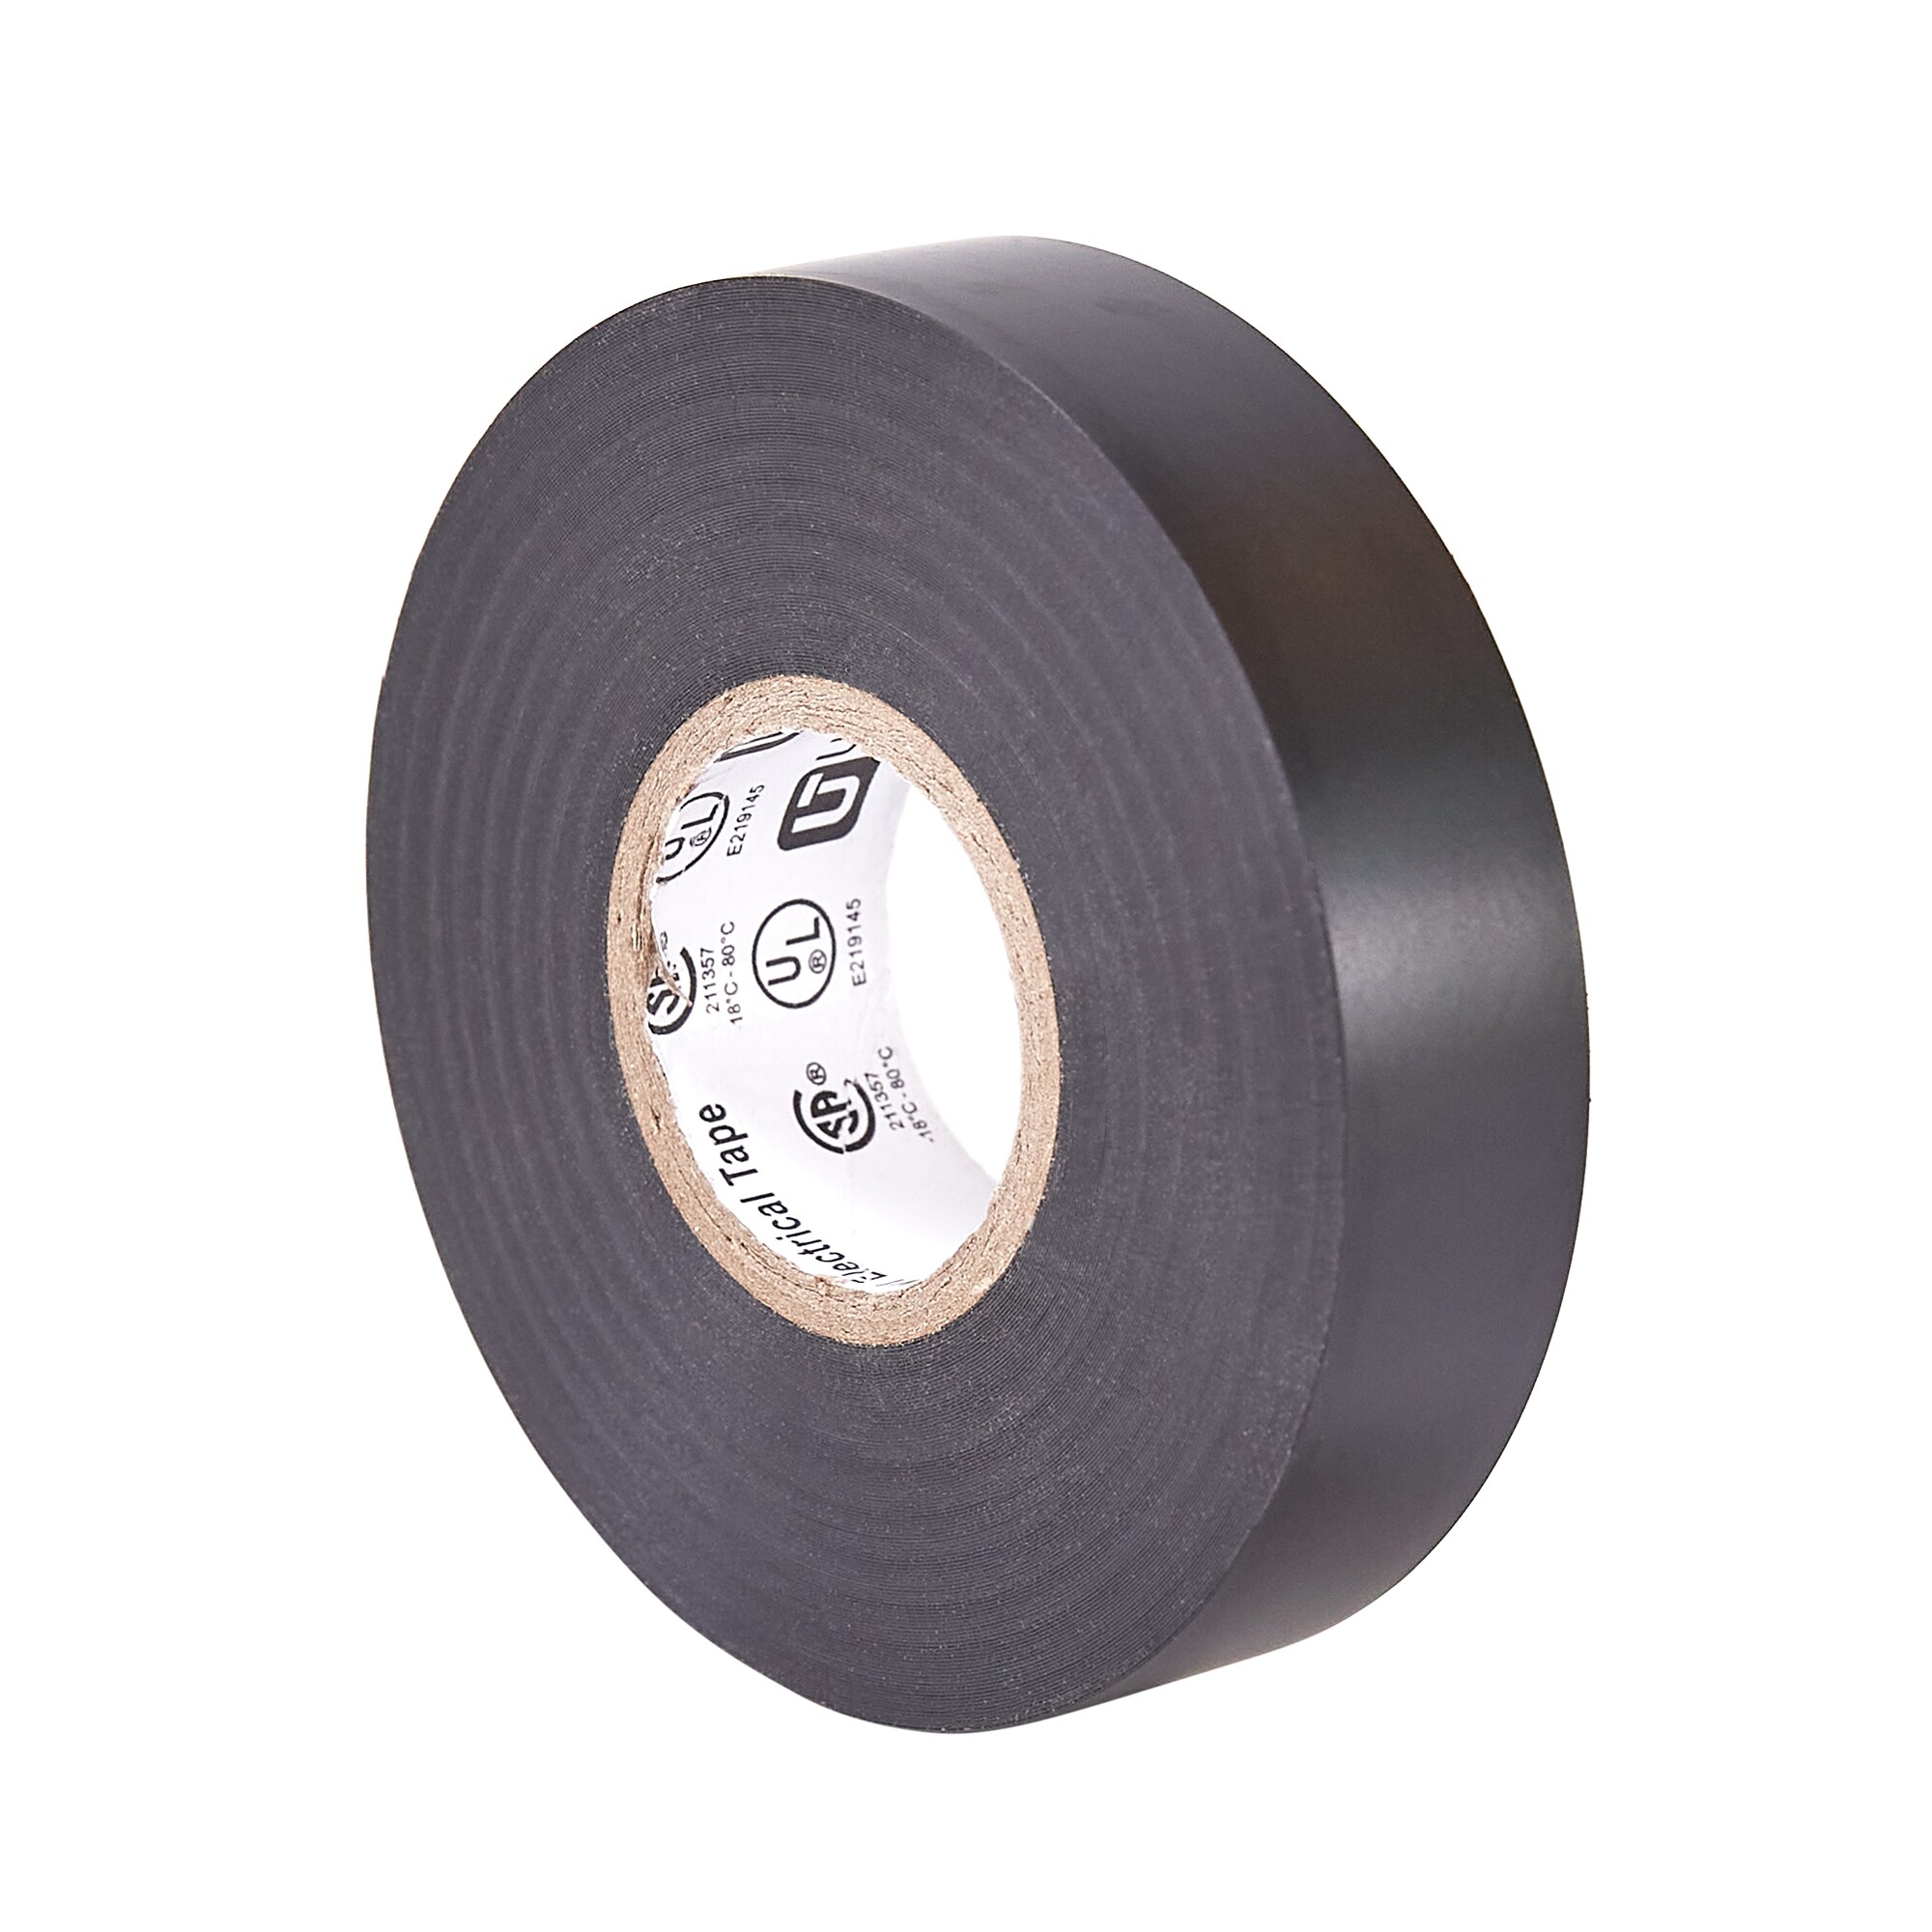 FREE SHIPPING! 10 Roll Per Pack Utilitech 60-ft Black Electrical Wire Tape 